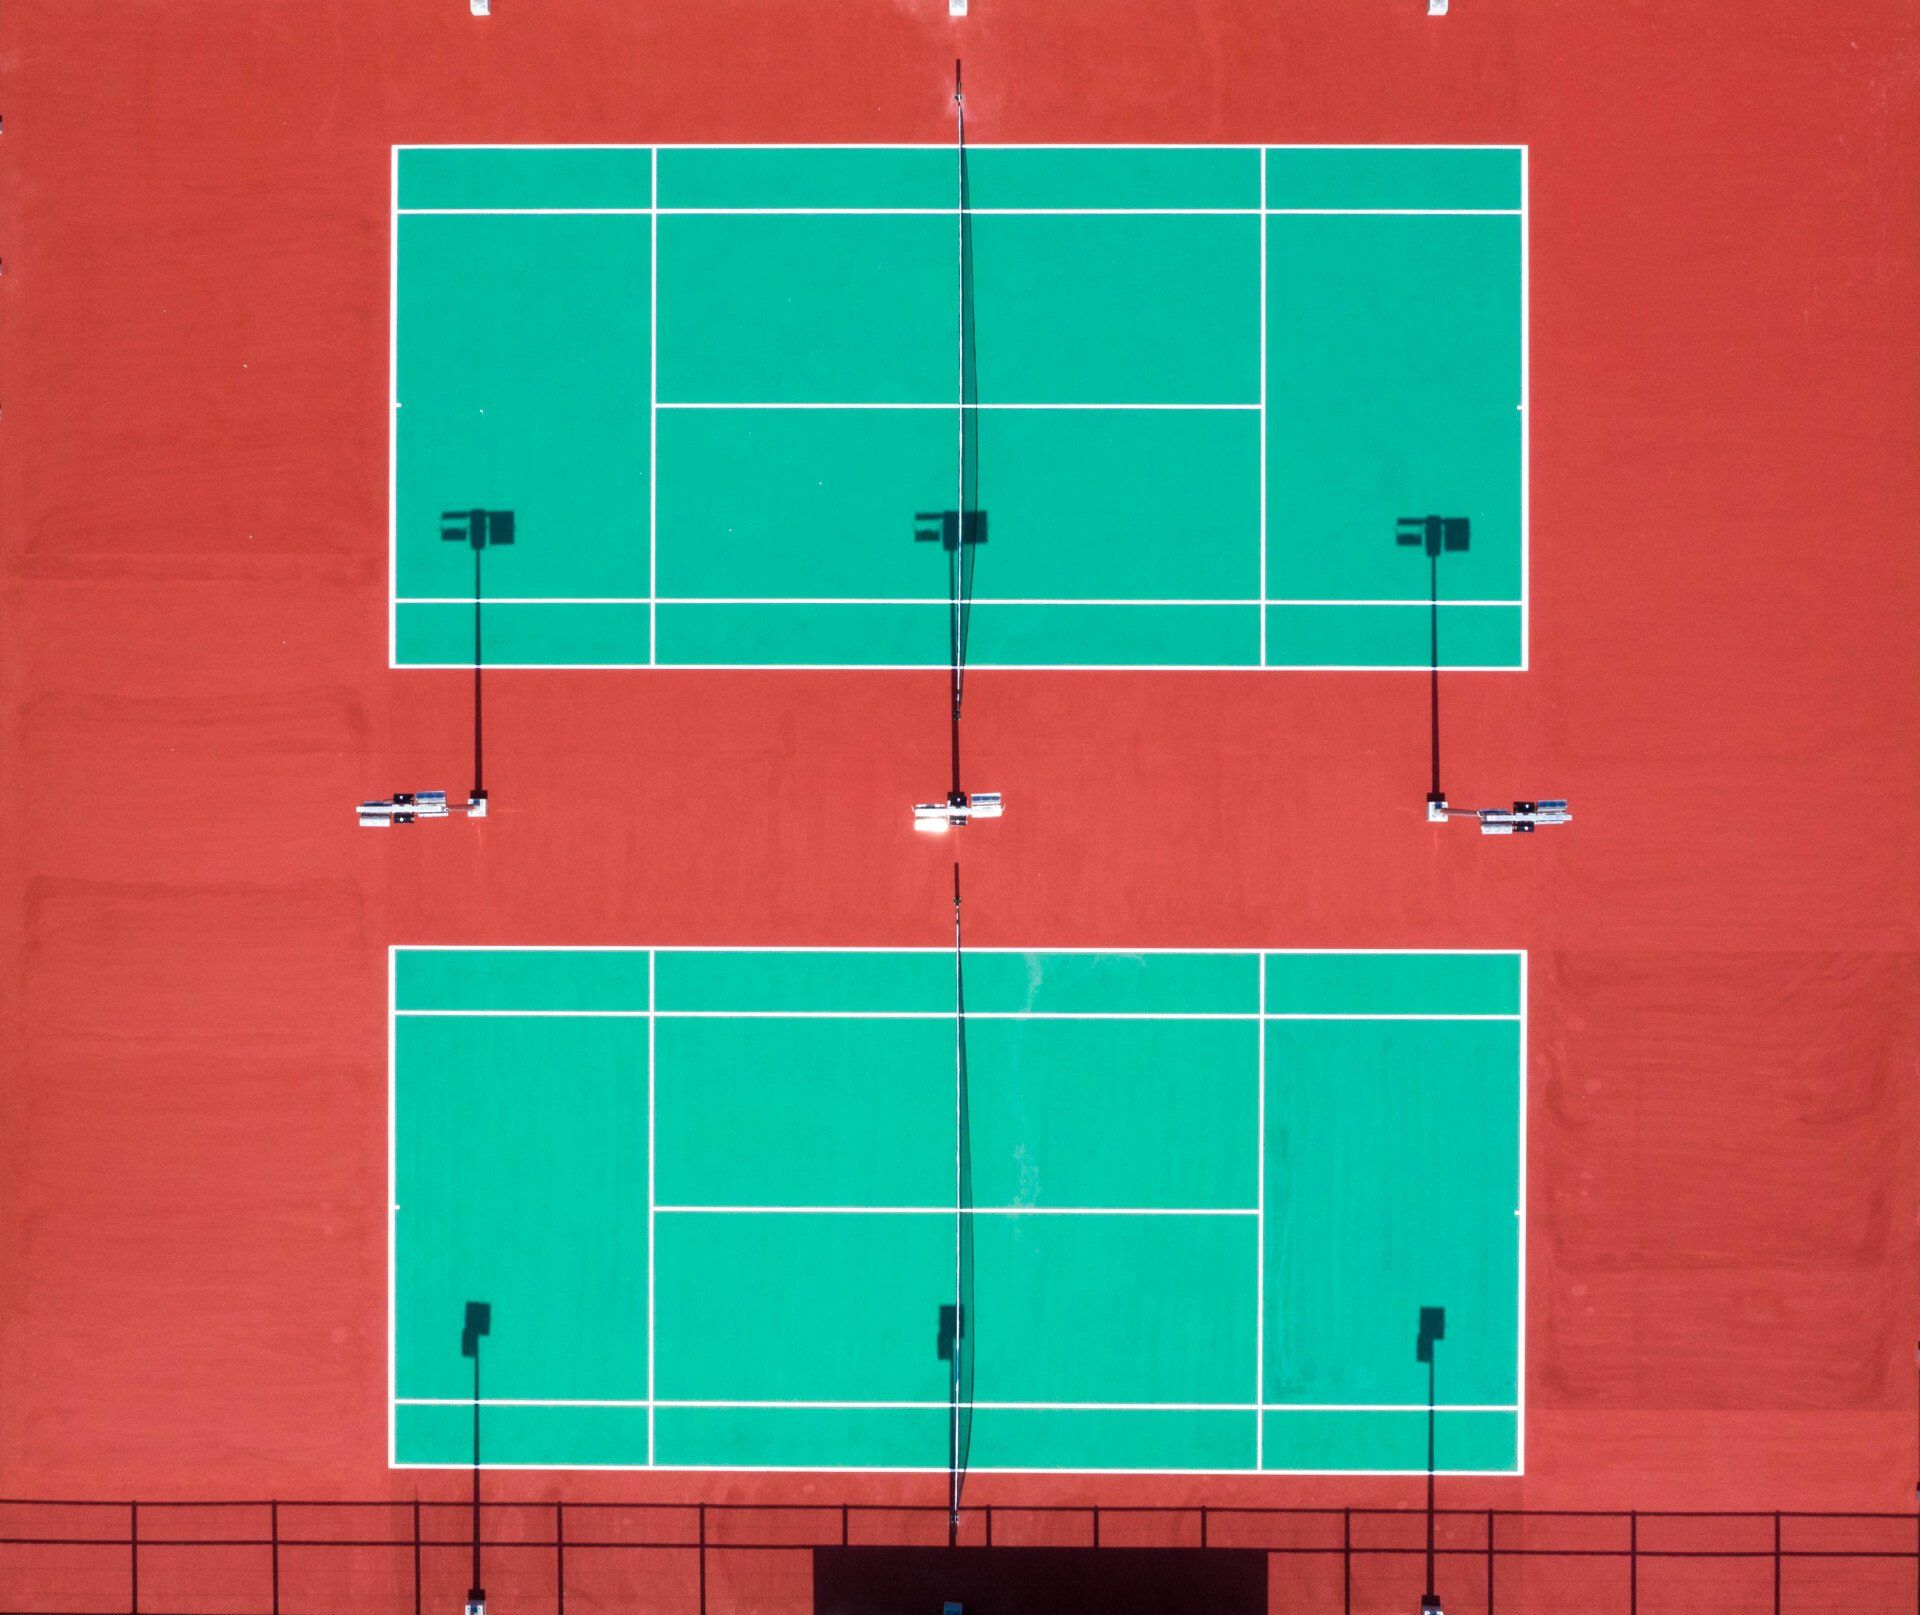 Green tennis courts with white markings.